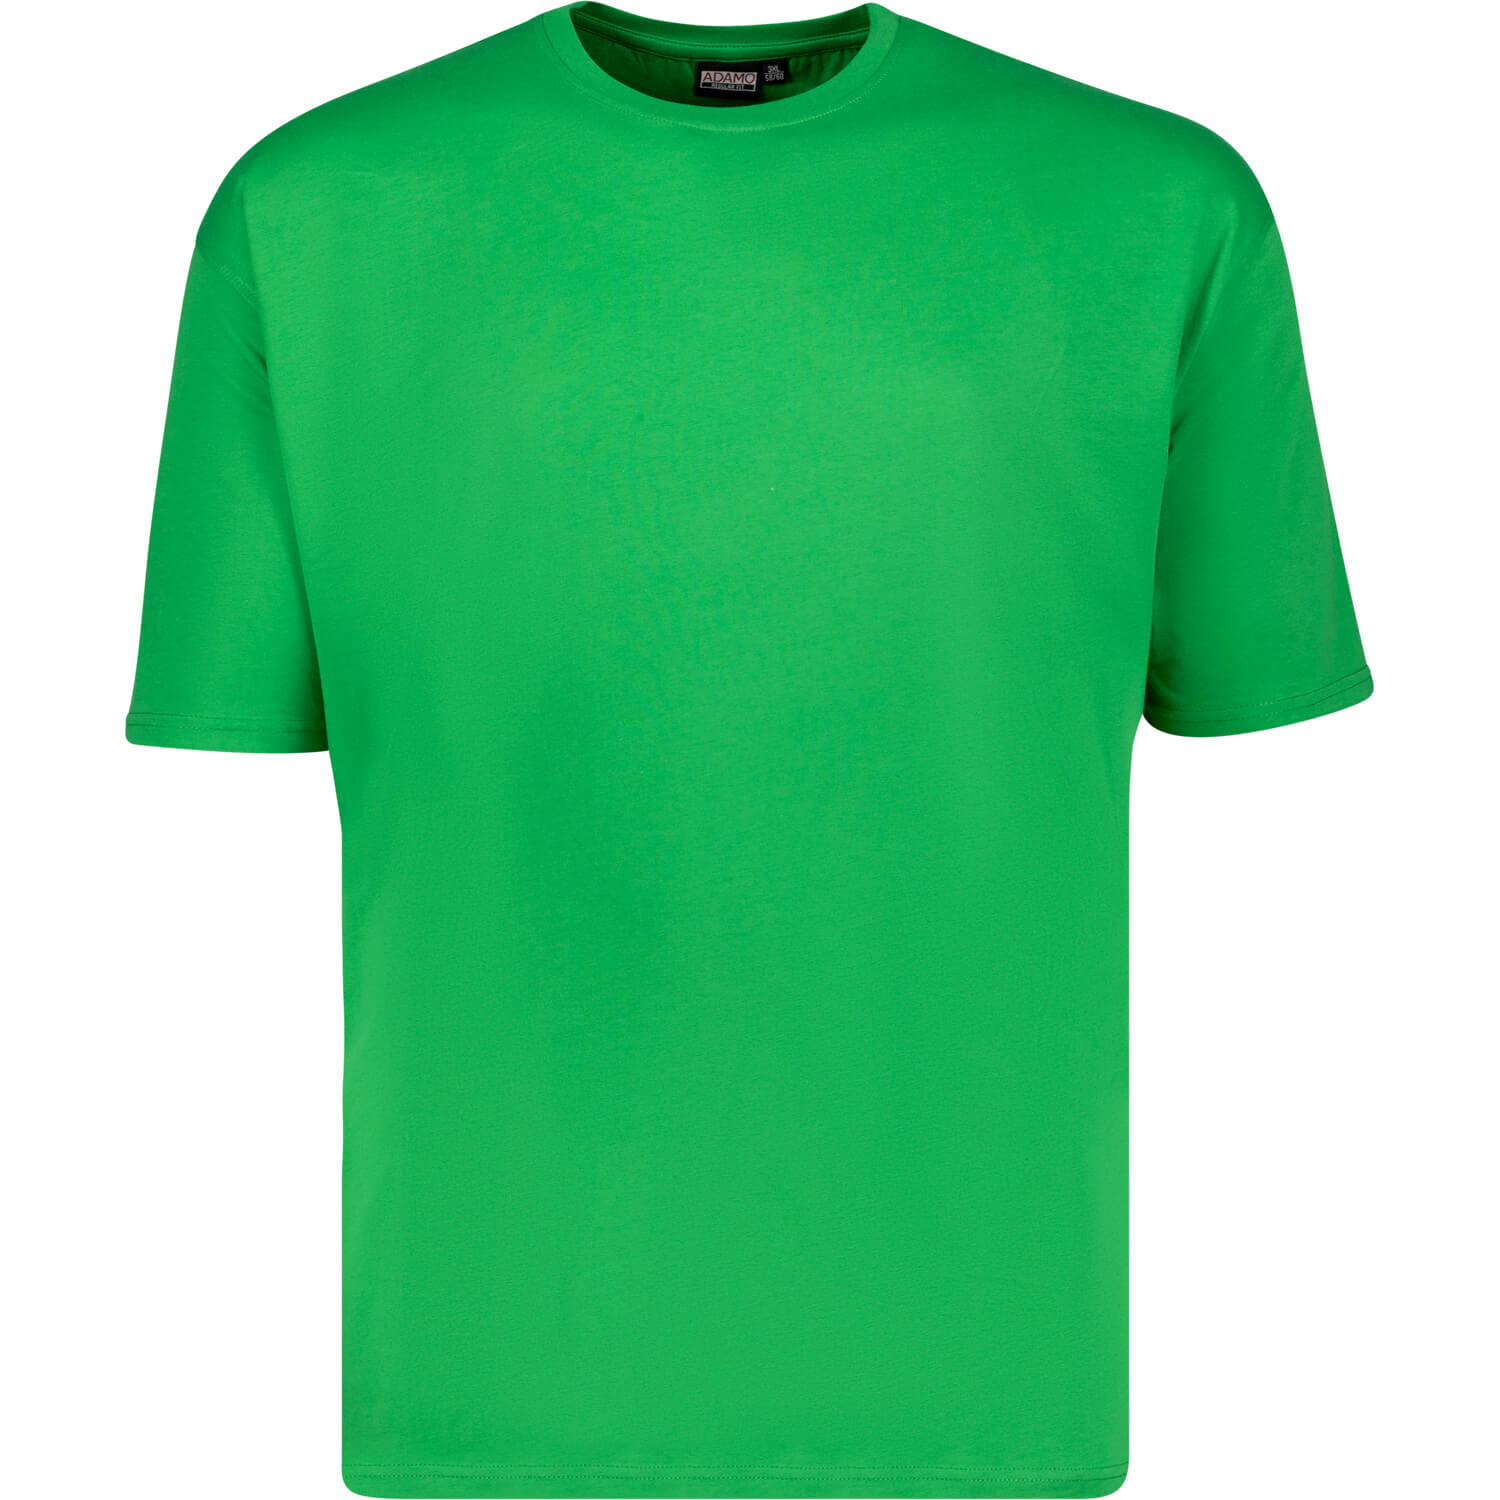 T-shirts in green series Kevin regular fit by Adamo for men up to oversize 8XL